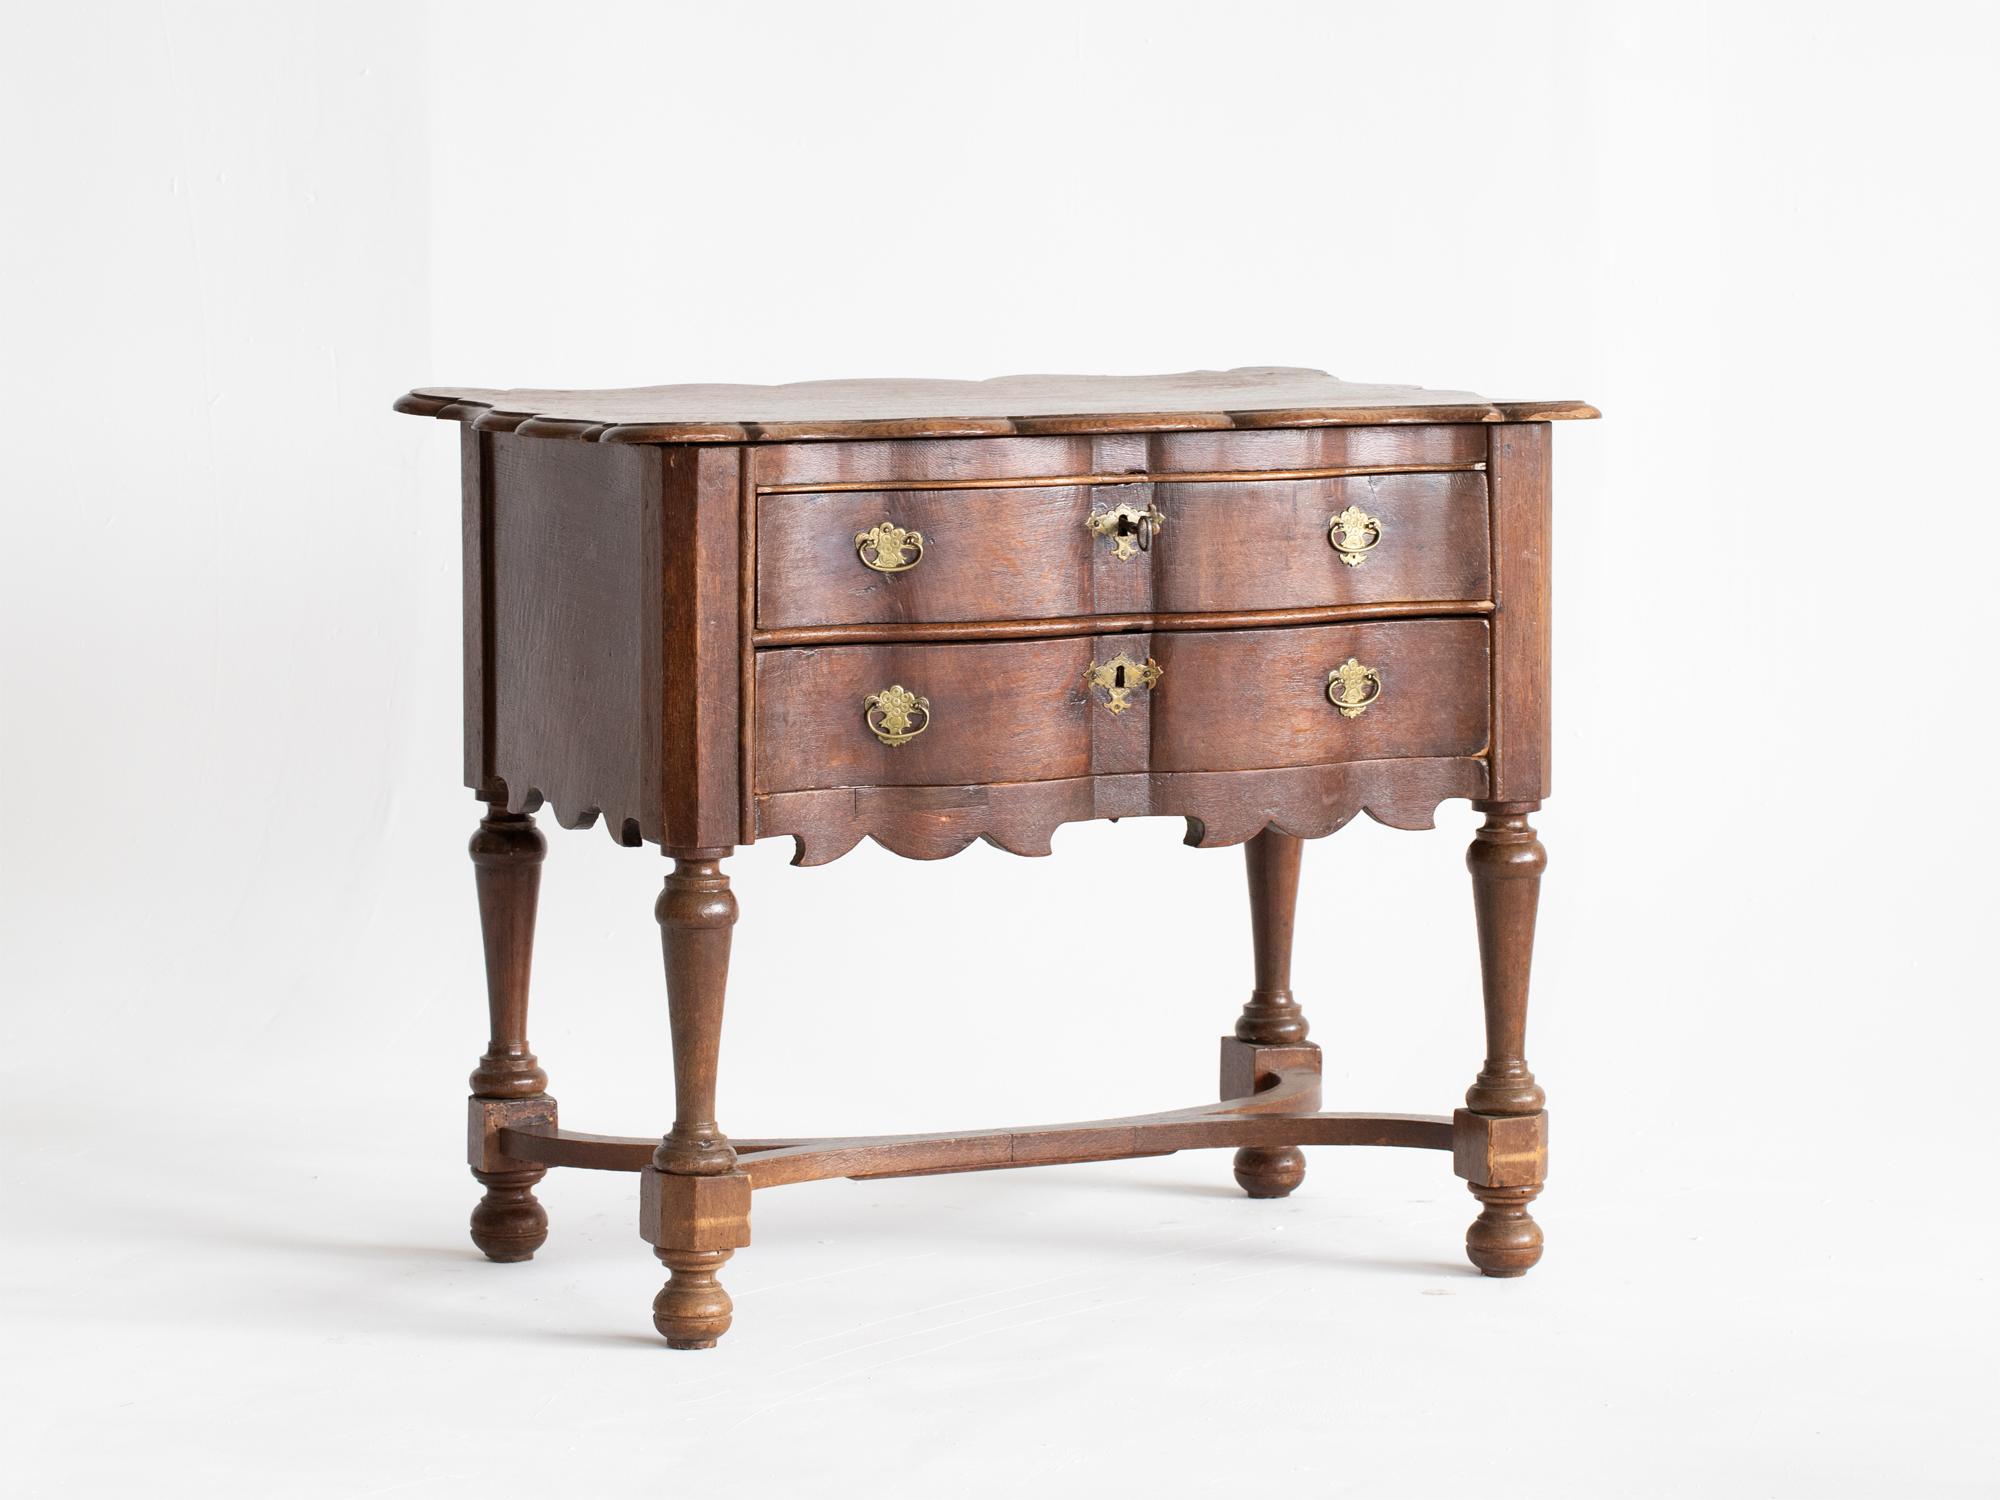 A William & Mary oak lowboy or chest of two long drawers, 18C.

Presented in good original order with minor repairs and restorations. Working locks with one shared key.

72 x 87 x 57 cm

28.3 x 34.3 x 22.4 